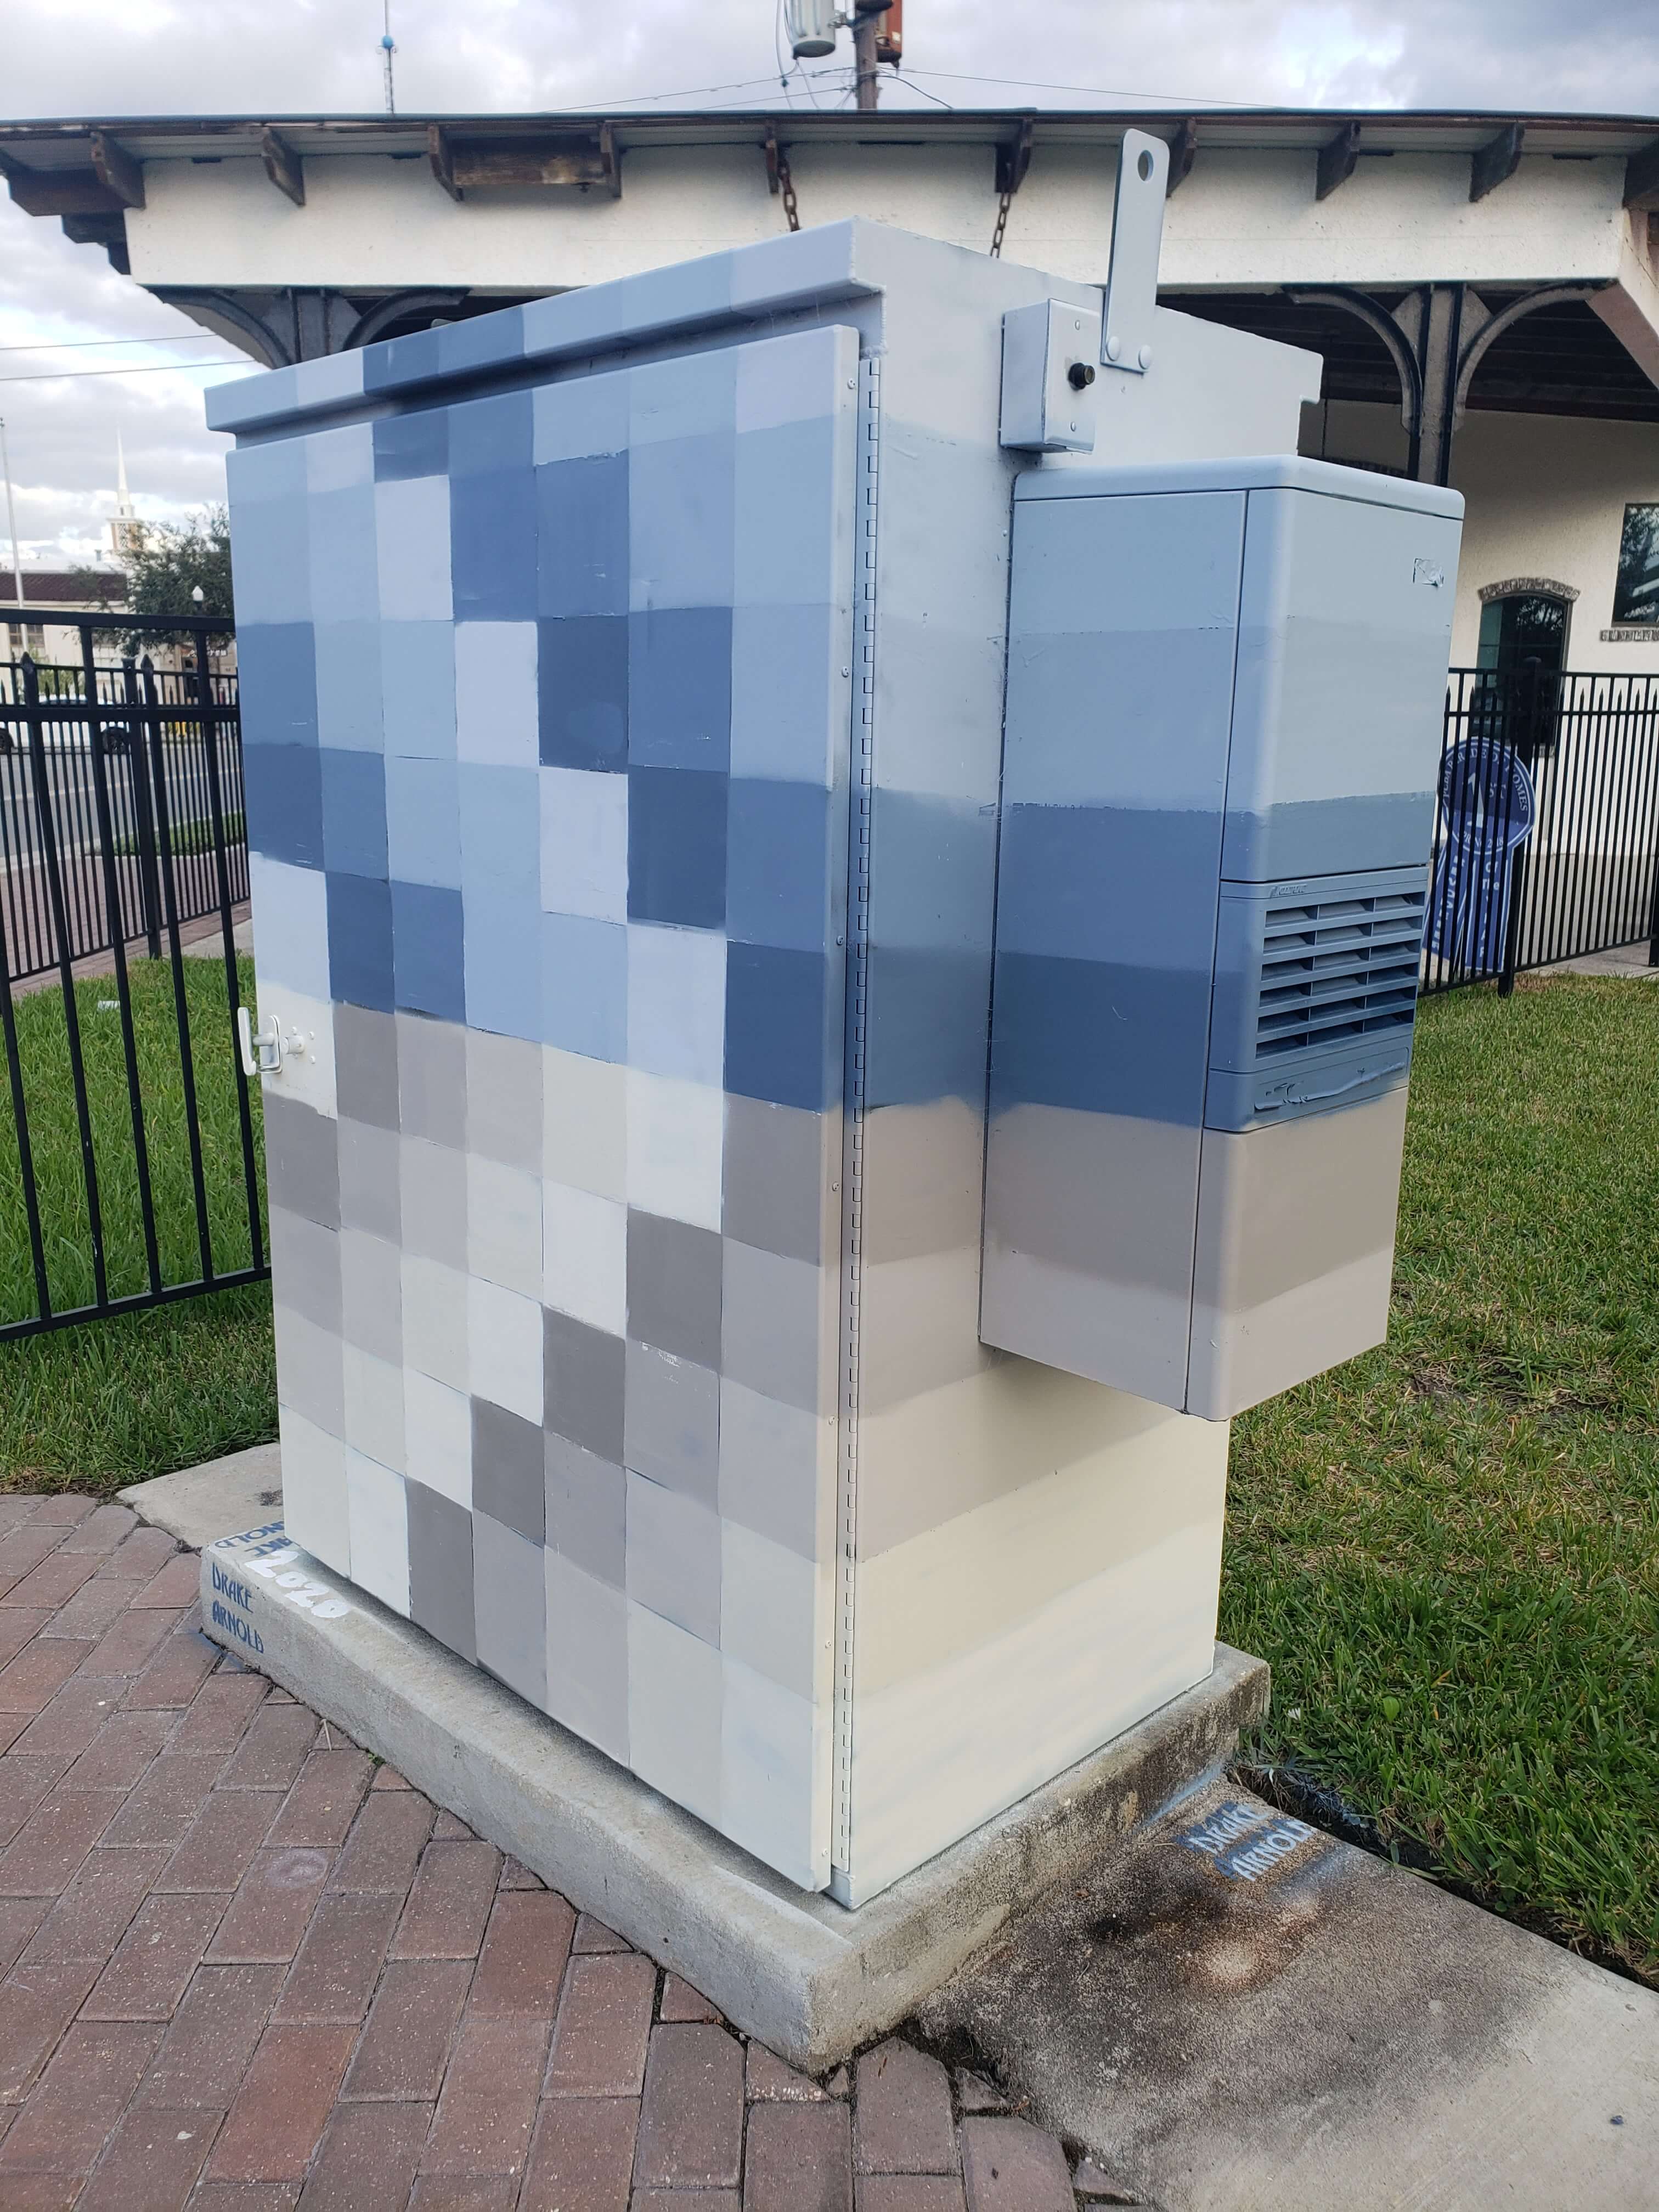 Drake Arnold Mural on Transformer Cabinet in Downtown Winter Haven, 2020